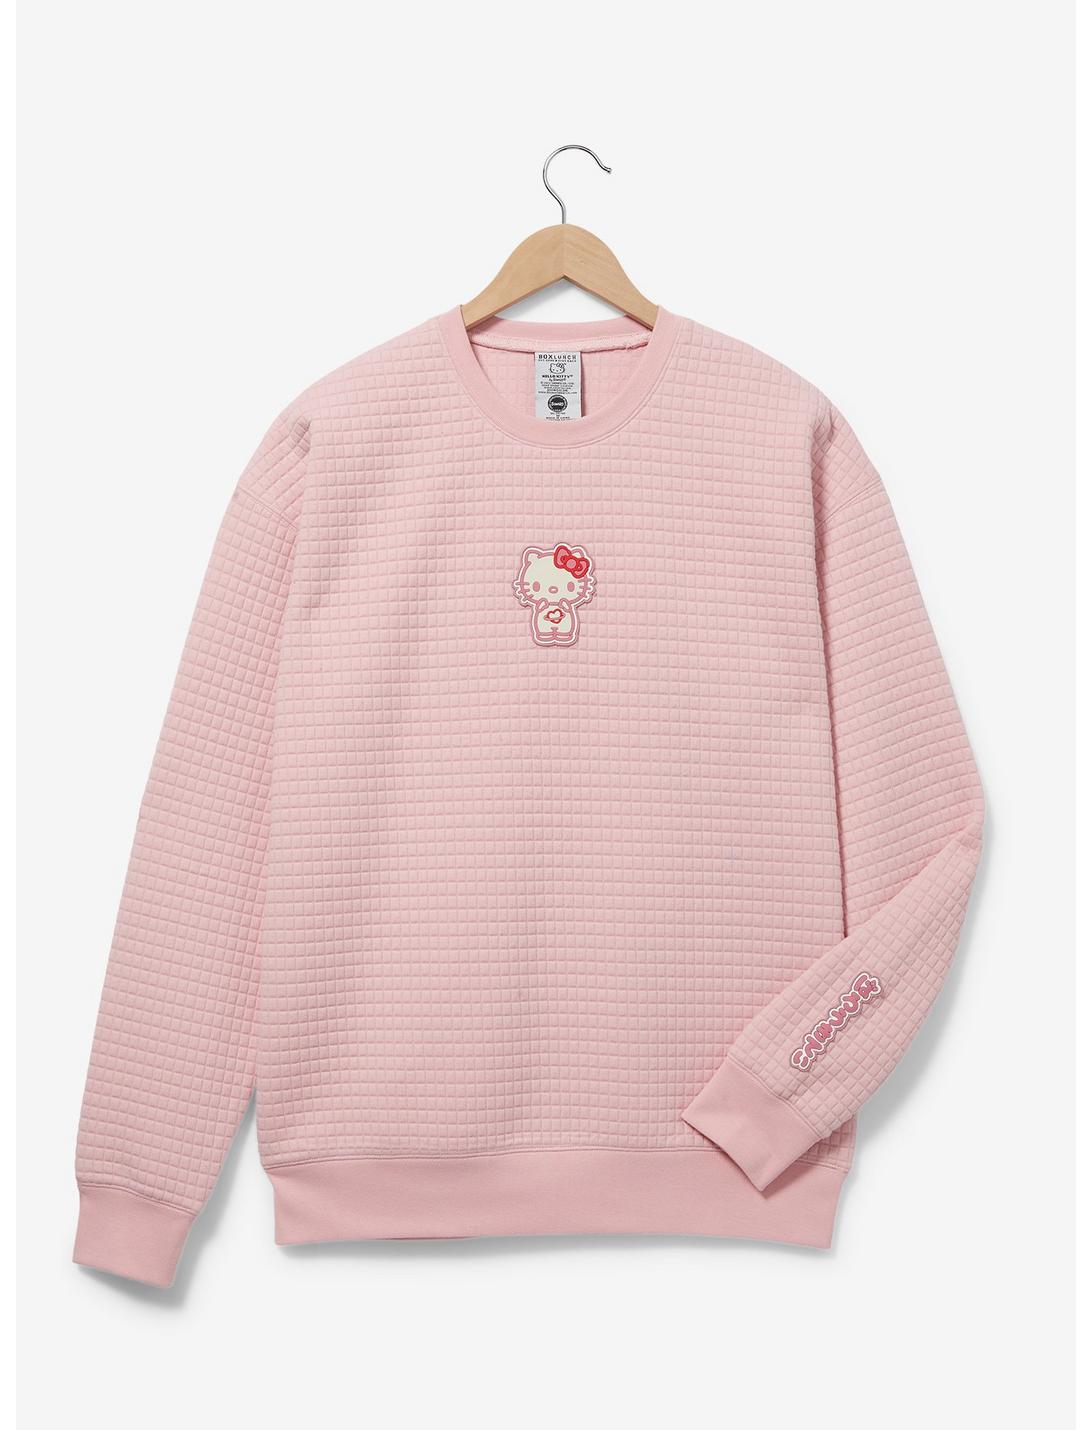 Sanrio Hello Kitty Quilted Crewneck - BoxLunch Exclusive, LIGHT PINK, hi-res